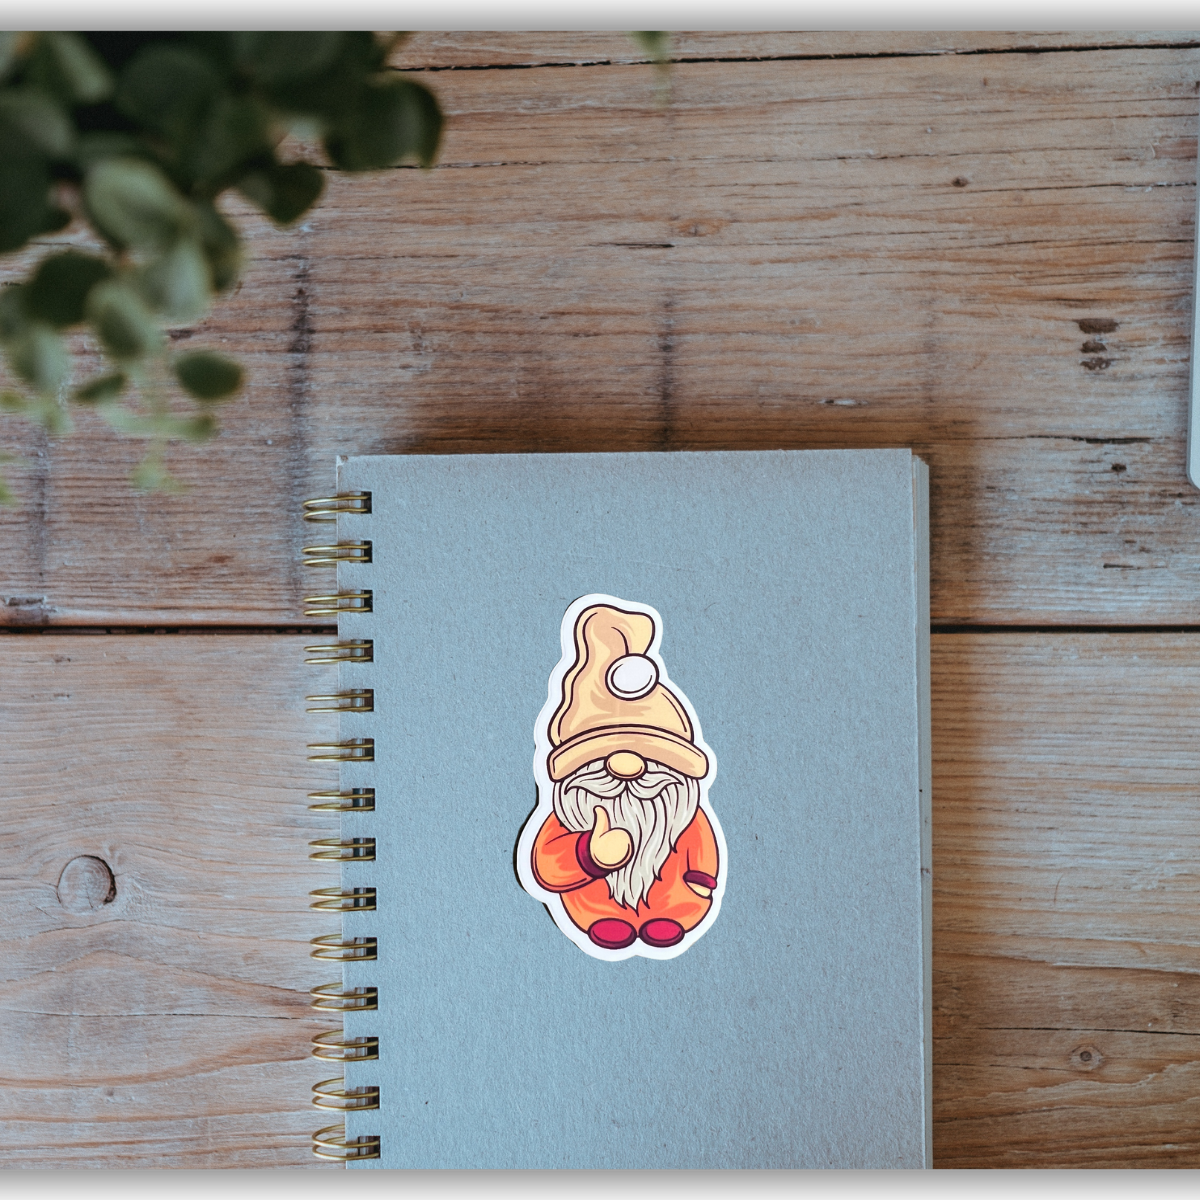 Water-Resistant plump Gnome Sticker